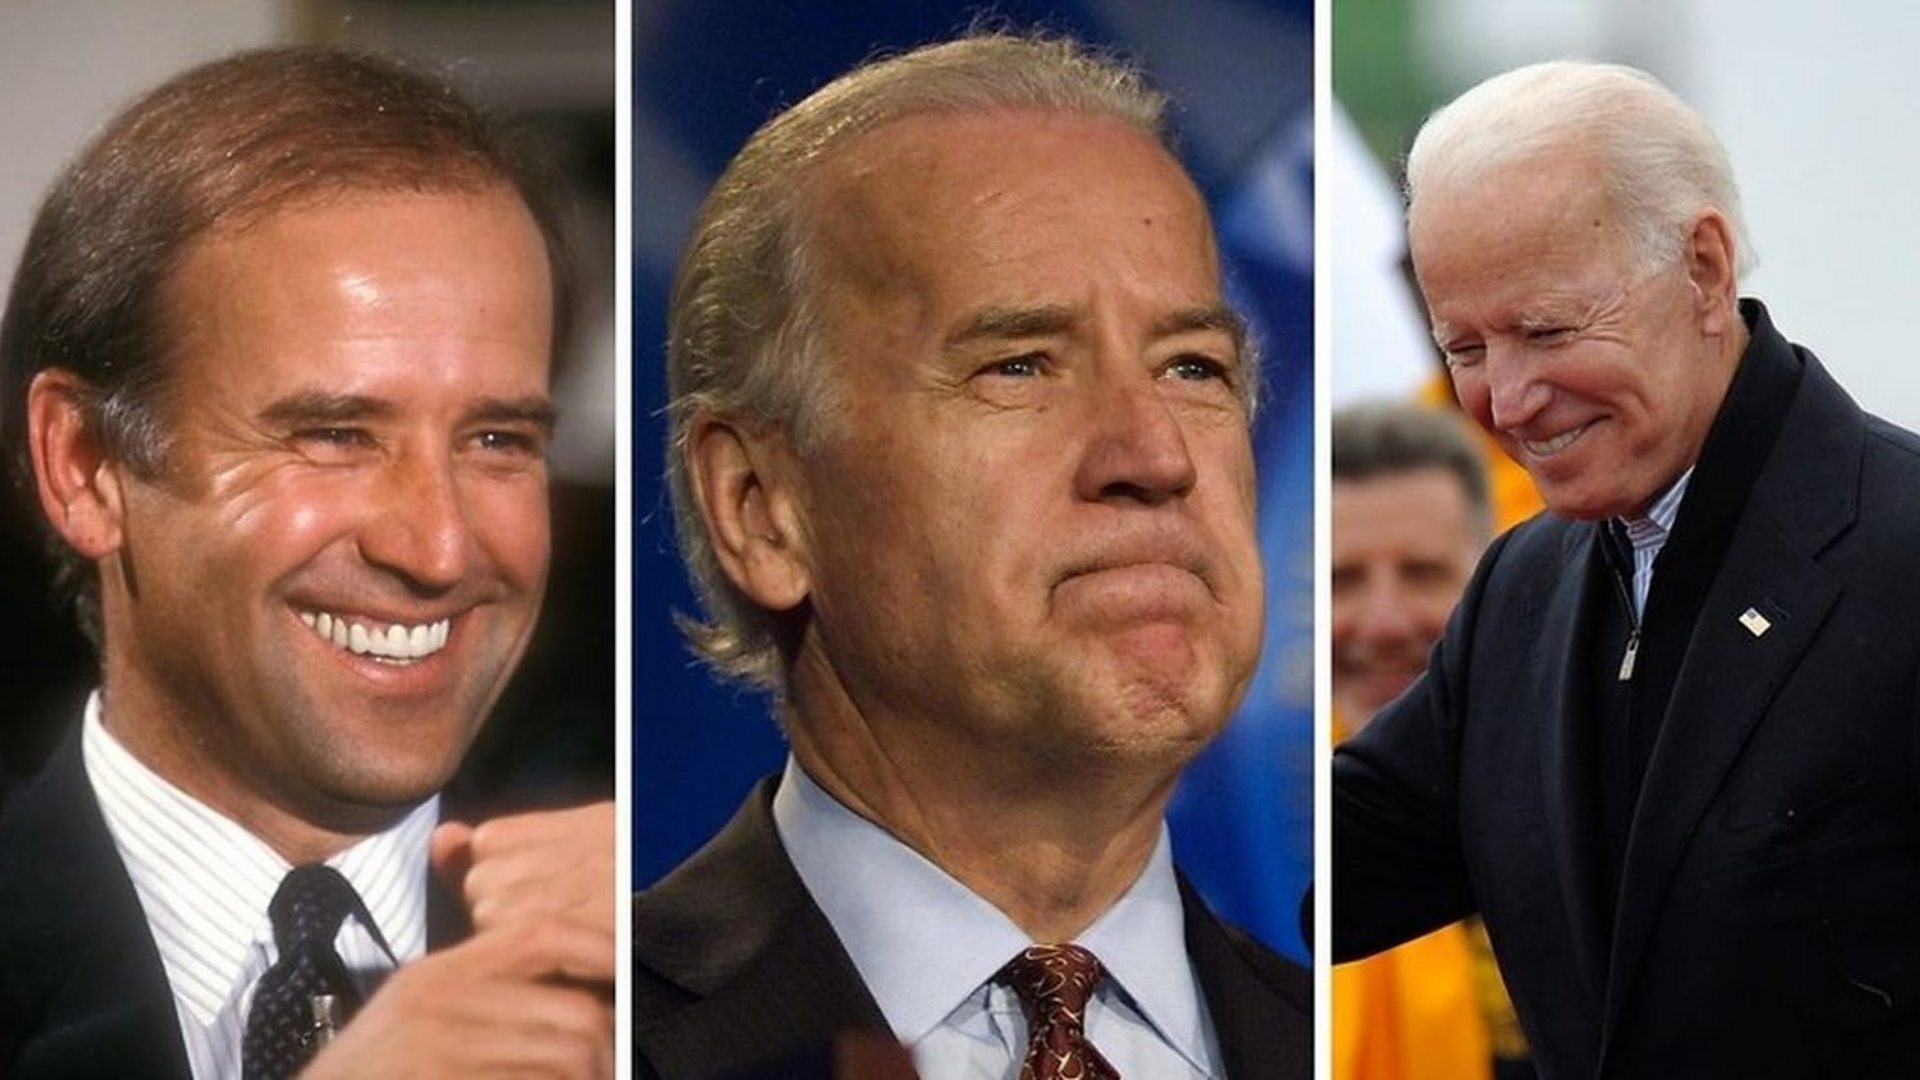 why did joe biden tell the democrats its over? - Biden|President|Joe|Years|Trump|Delaware|Vice|Time|Obama|Senate|States|Law|Age|Campaign|Election|Administration|Family|House|Senator|Office|School|Wife|People|Hunter|University|Act|State|Year|Life|Party|Committee|Children|Beau|Daughter|War|Jill|Day|Facts|Americans|Presidency|Joe Biden|United States|Vice President|White House|Law School|President Trump|Foreign Relations Committee|Donald Trump|President Biden|Presidential Campaign|Presidential Election|Democratic Party|Syracuse University|United Nations|Net Worth|Barack Obama|Judiciary Committee|Neilia Hunter|U.S. Senate|Hillary Clinton|New York Times|Obama Administration|Empty Store Shelves|Systemic Racism|Castle County Council|Archmere Academy|U.S. Senator|Vice Presidency|Second Term|Biden Administration